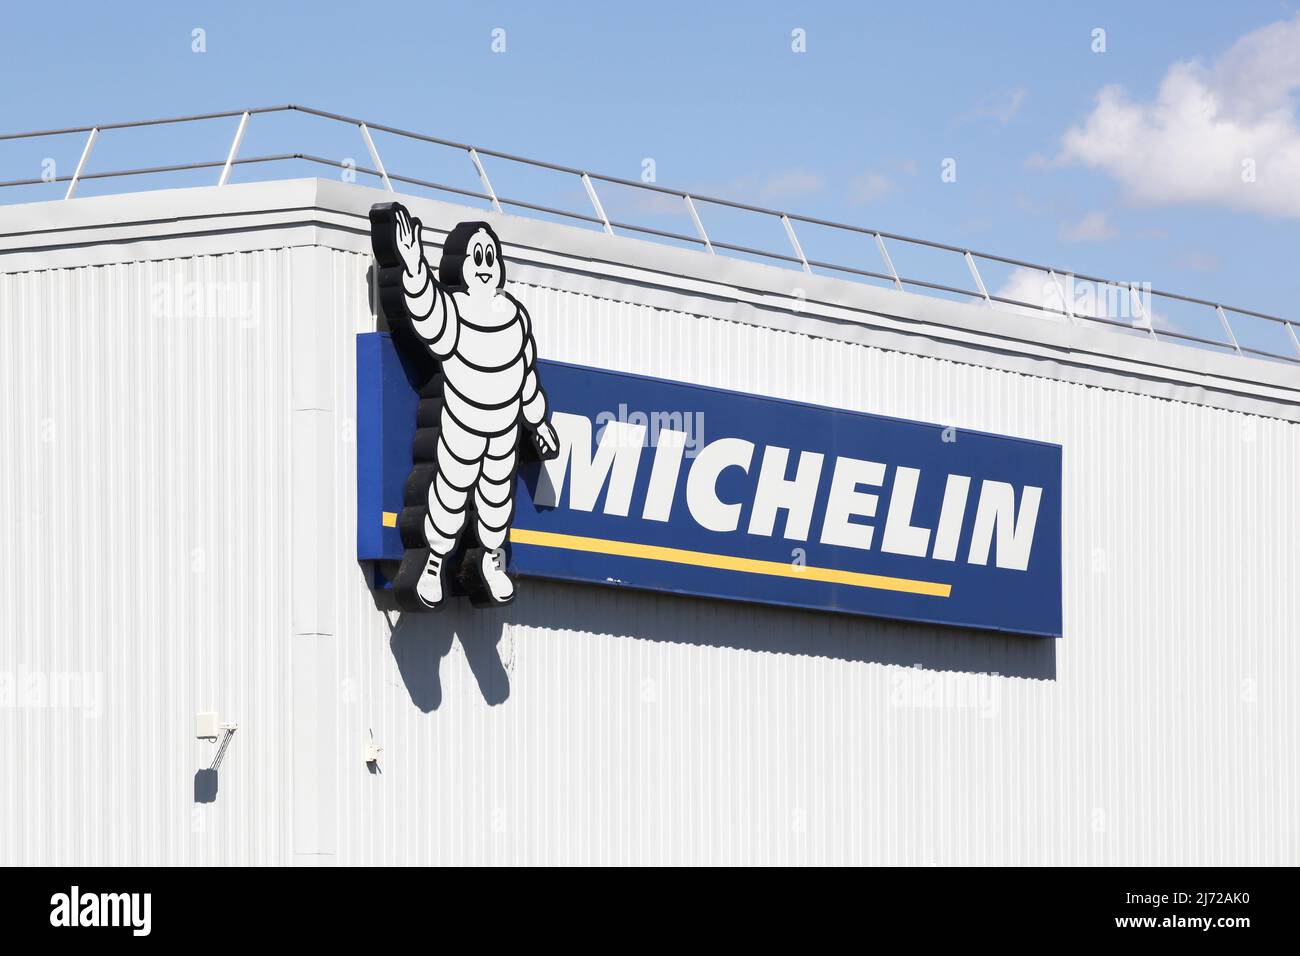 Roanne, France - May 31, 2020: Michelin factory in Roanne. Michelin is a tire manufacturer based in Clermont-Ferrand Stock Photo